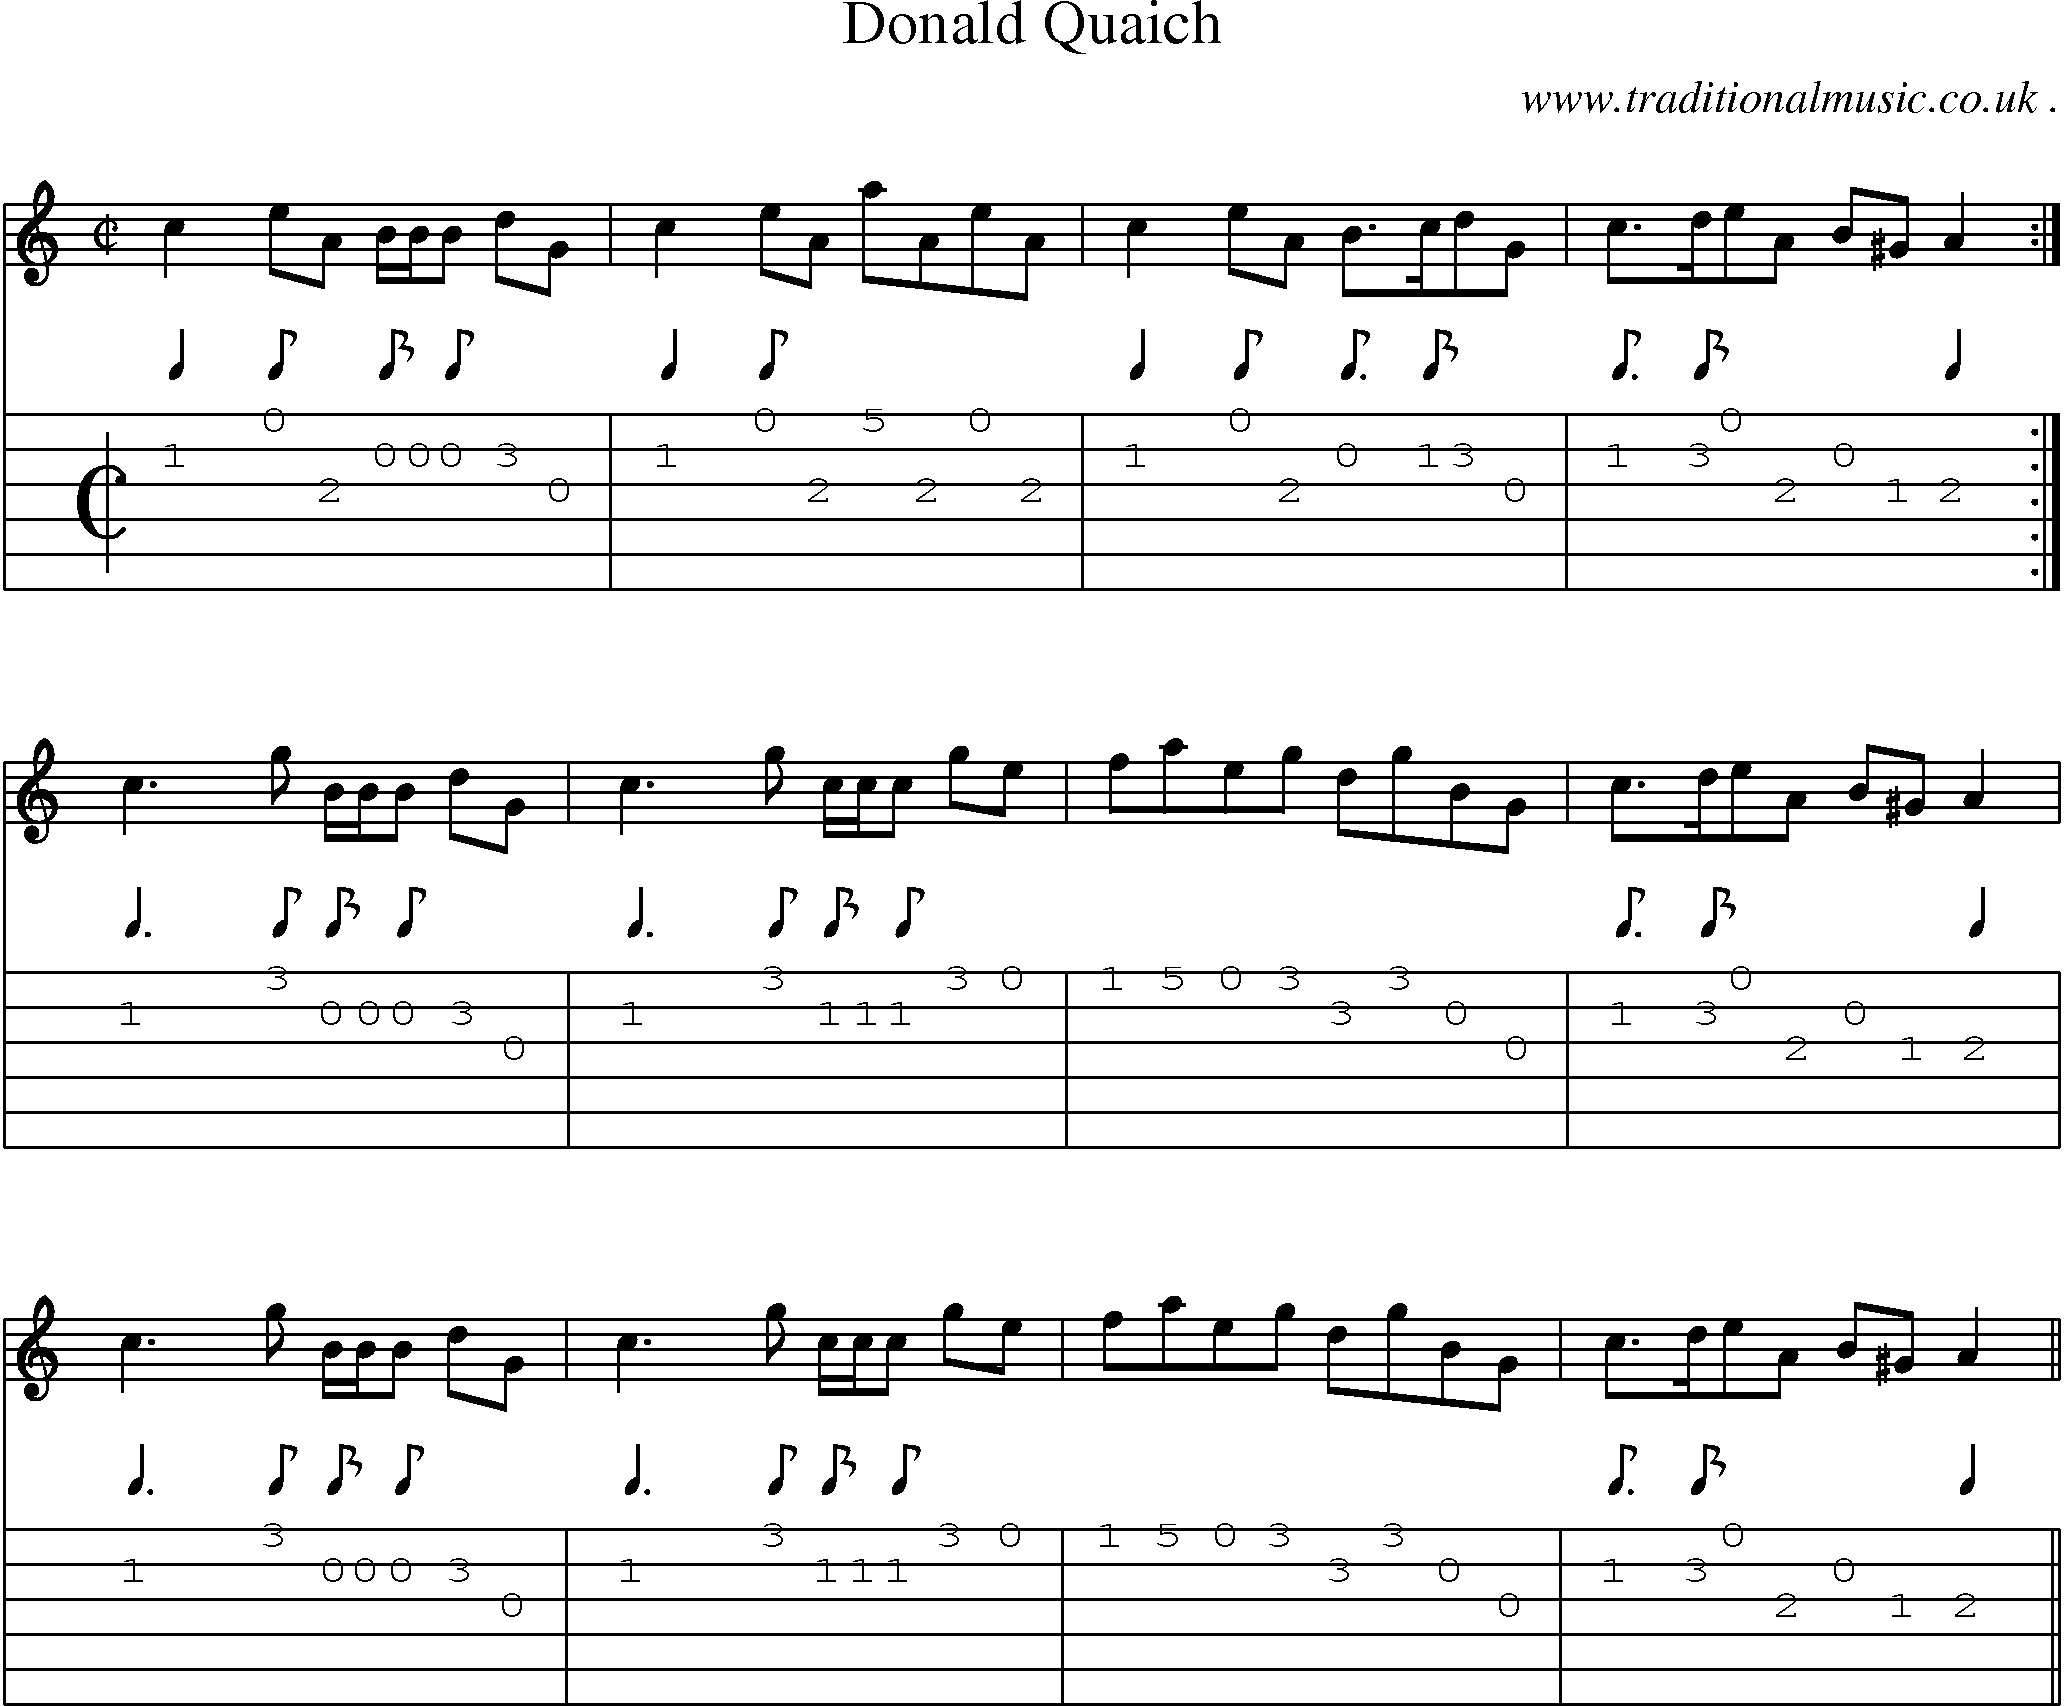 Sheet-music  score, Chords and Guitar Tabs for Donald Quaich